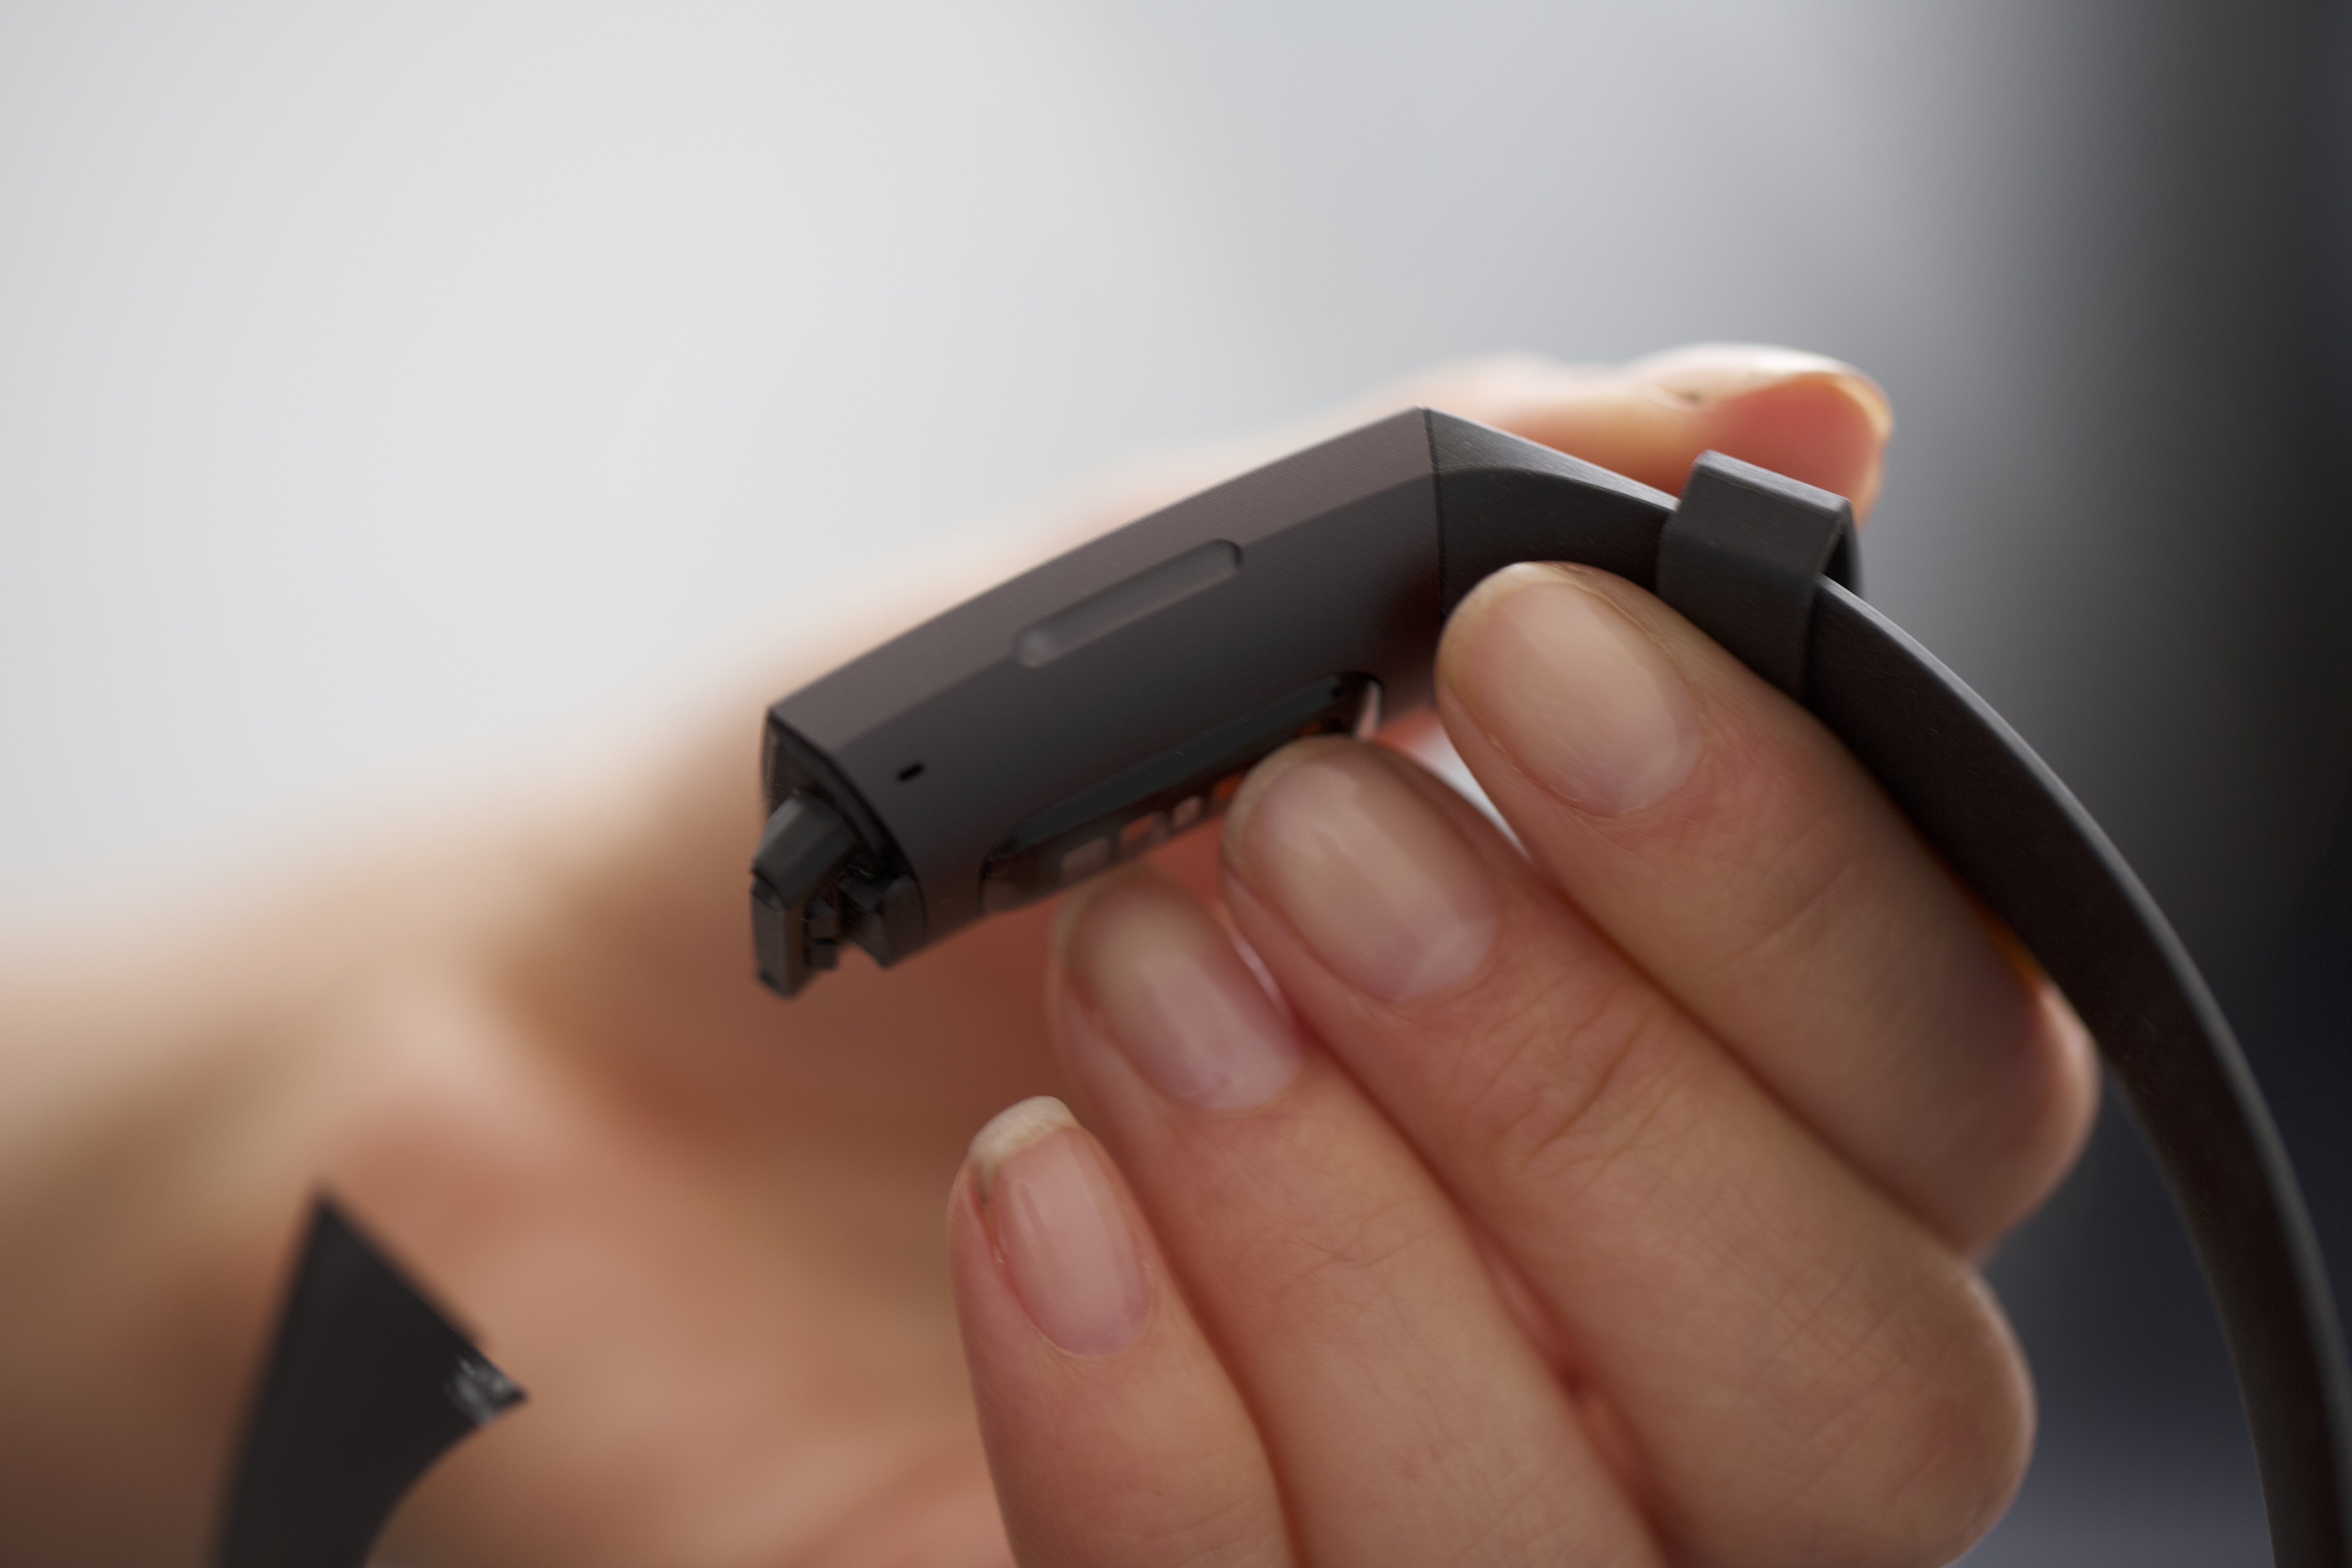 With Charge 3, Fitbit blurs the 